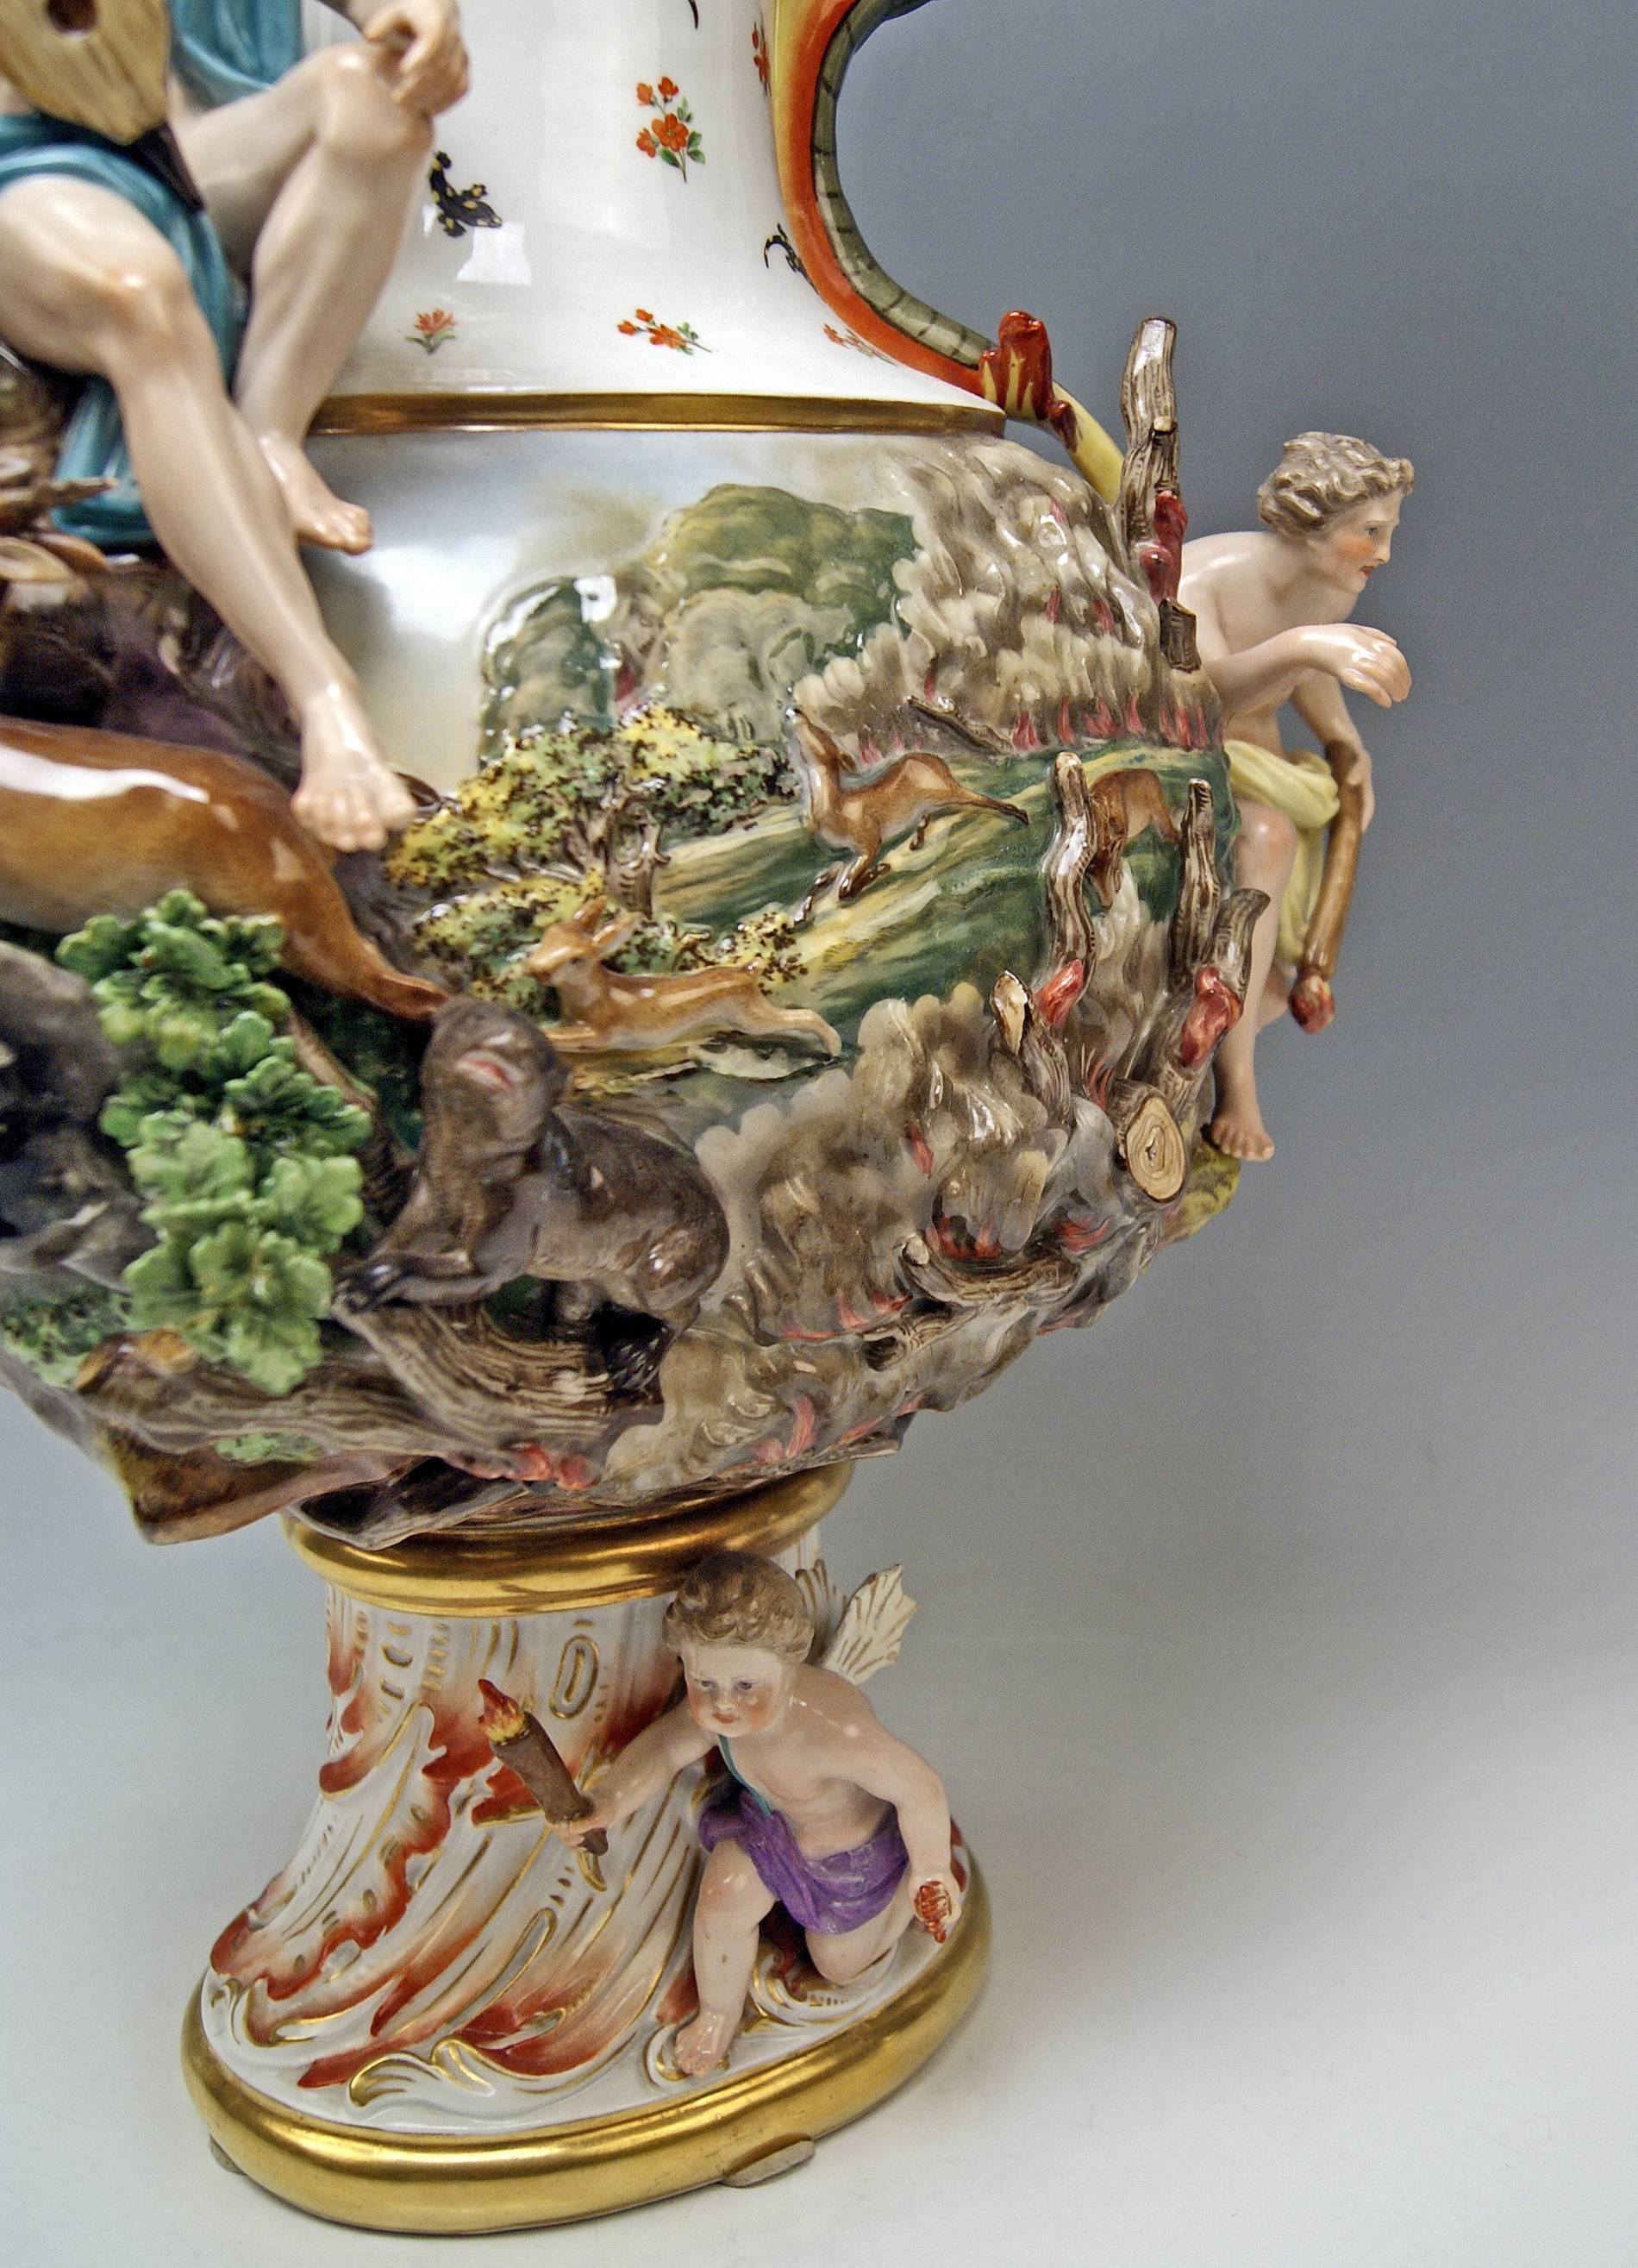 Porcelain MEISSEN HUGE EWER THE FIRE FOUR ELEMENTS BY KAENDLER height 26.18 inches c.1860